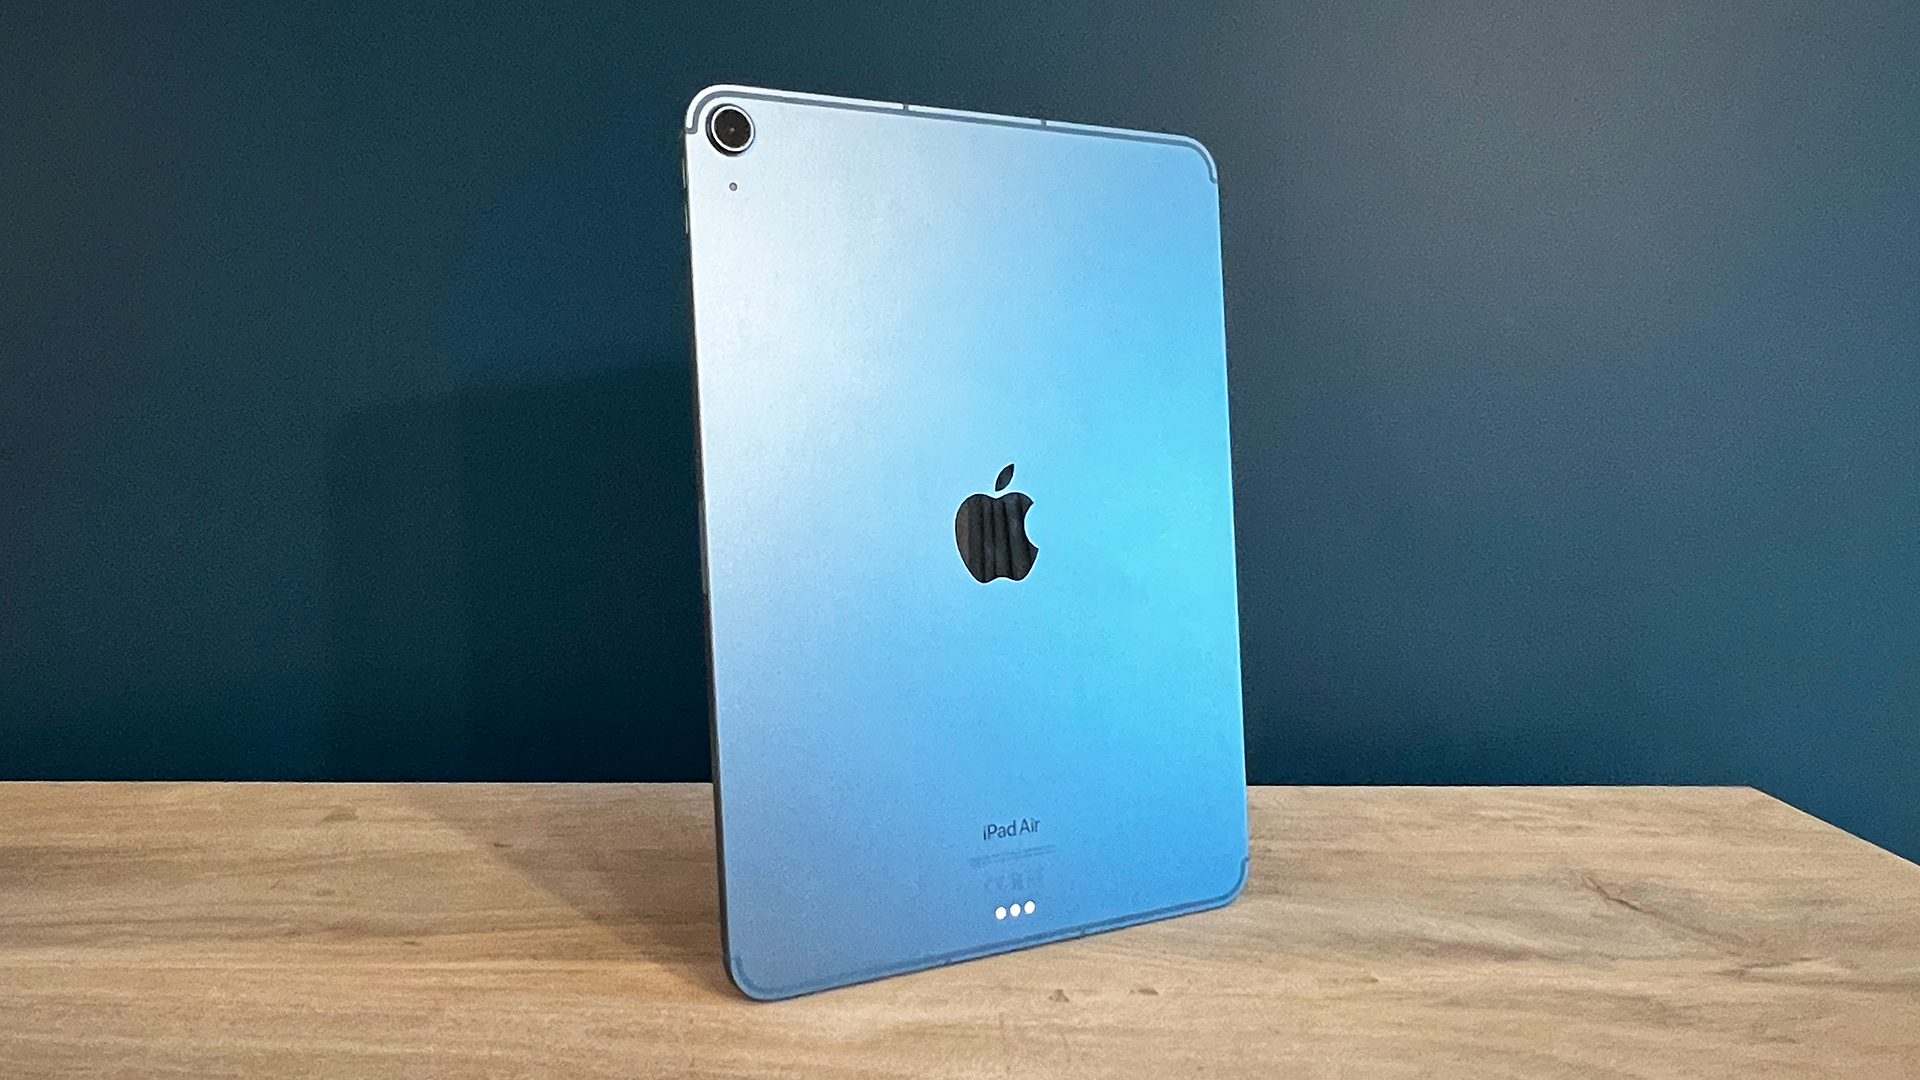 Apple iPad air 5 review: An advanced tablet with 5G, M1 chip and brilliant  video capability